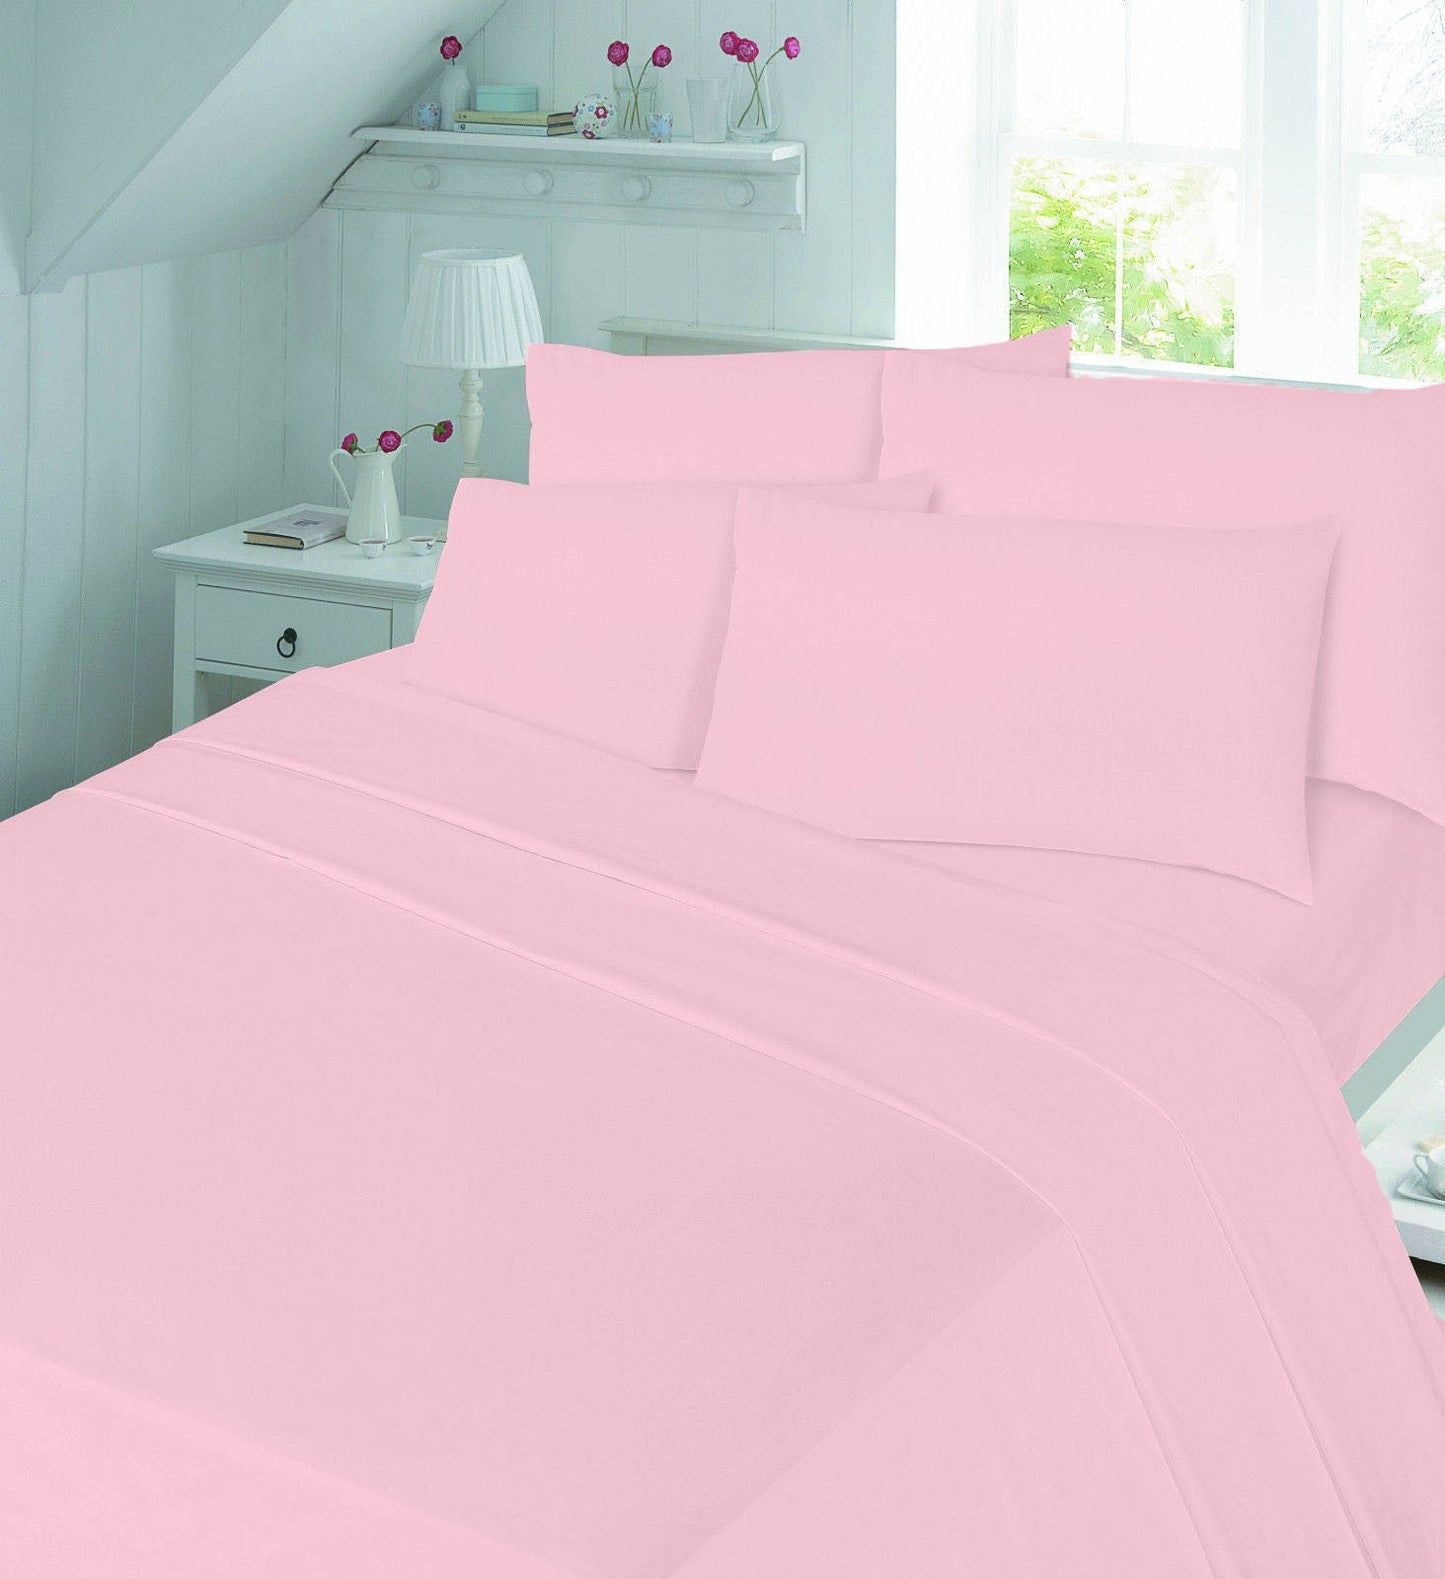 Flannelette Fitted Sheet Cotton Thermal With FREE MATCHING PILLOWCASE - TheComfortshop.co.ukBed Sheets0721718966500thecomfortshopTheComfortshop.co.ukFLNT FIT FREE PP Pink SinglePinkFitted Sheet Single OnlyFlannelette Fitted Sheet Cotton Thermal With FREE MATCHING PILLOWCASE - TheComfortshop.co.uk